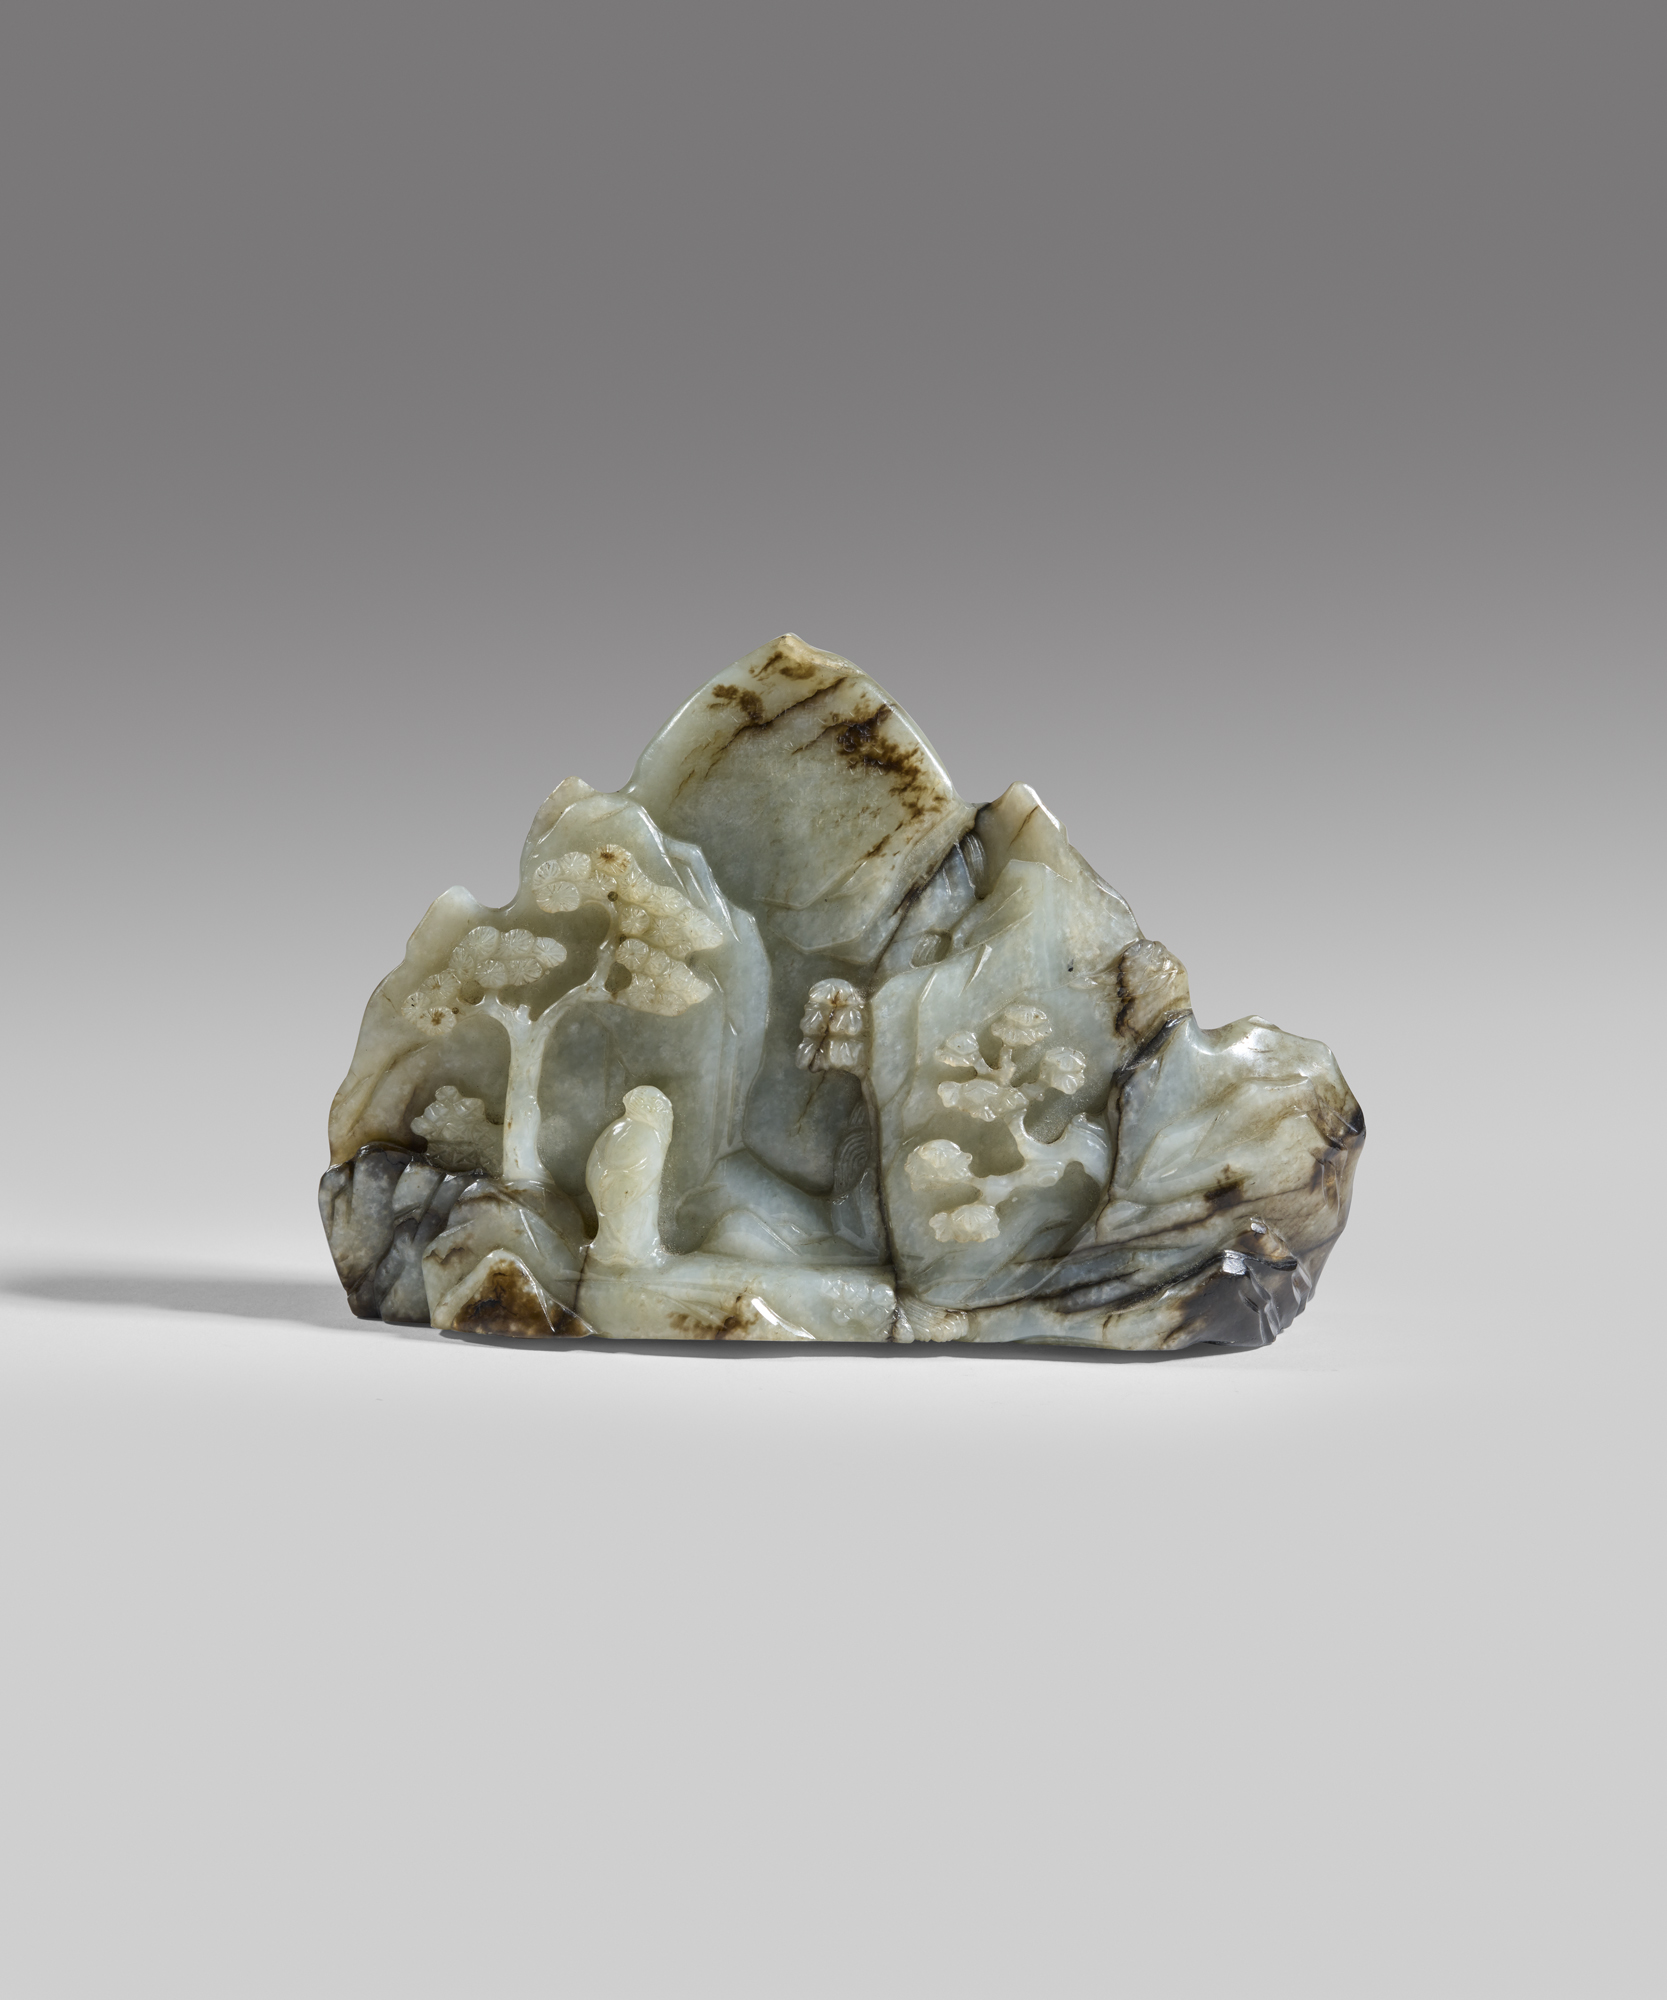 An important imperial inscribed mottled white jade boulder (Qianlong period, 1735-1796)